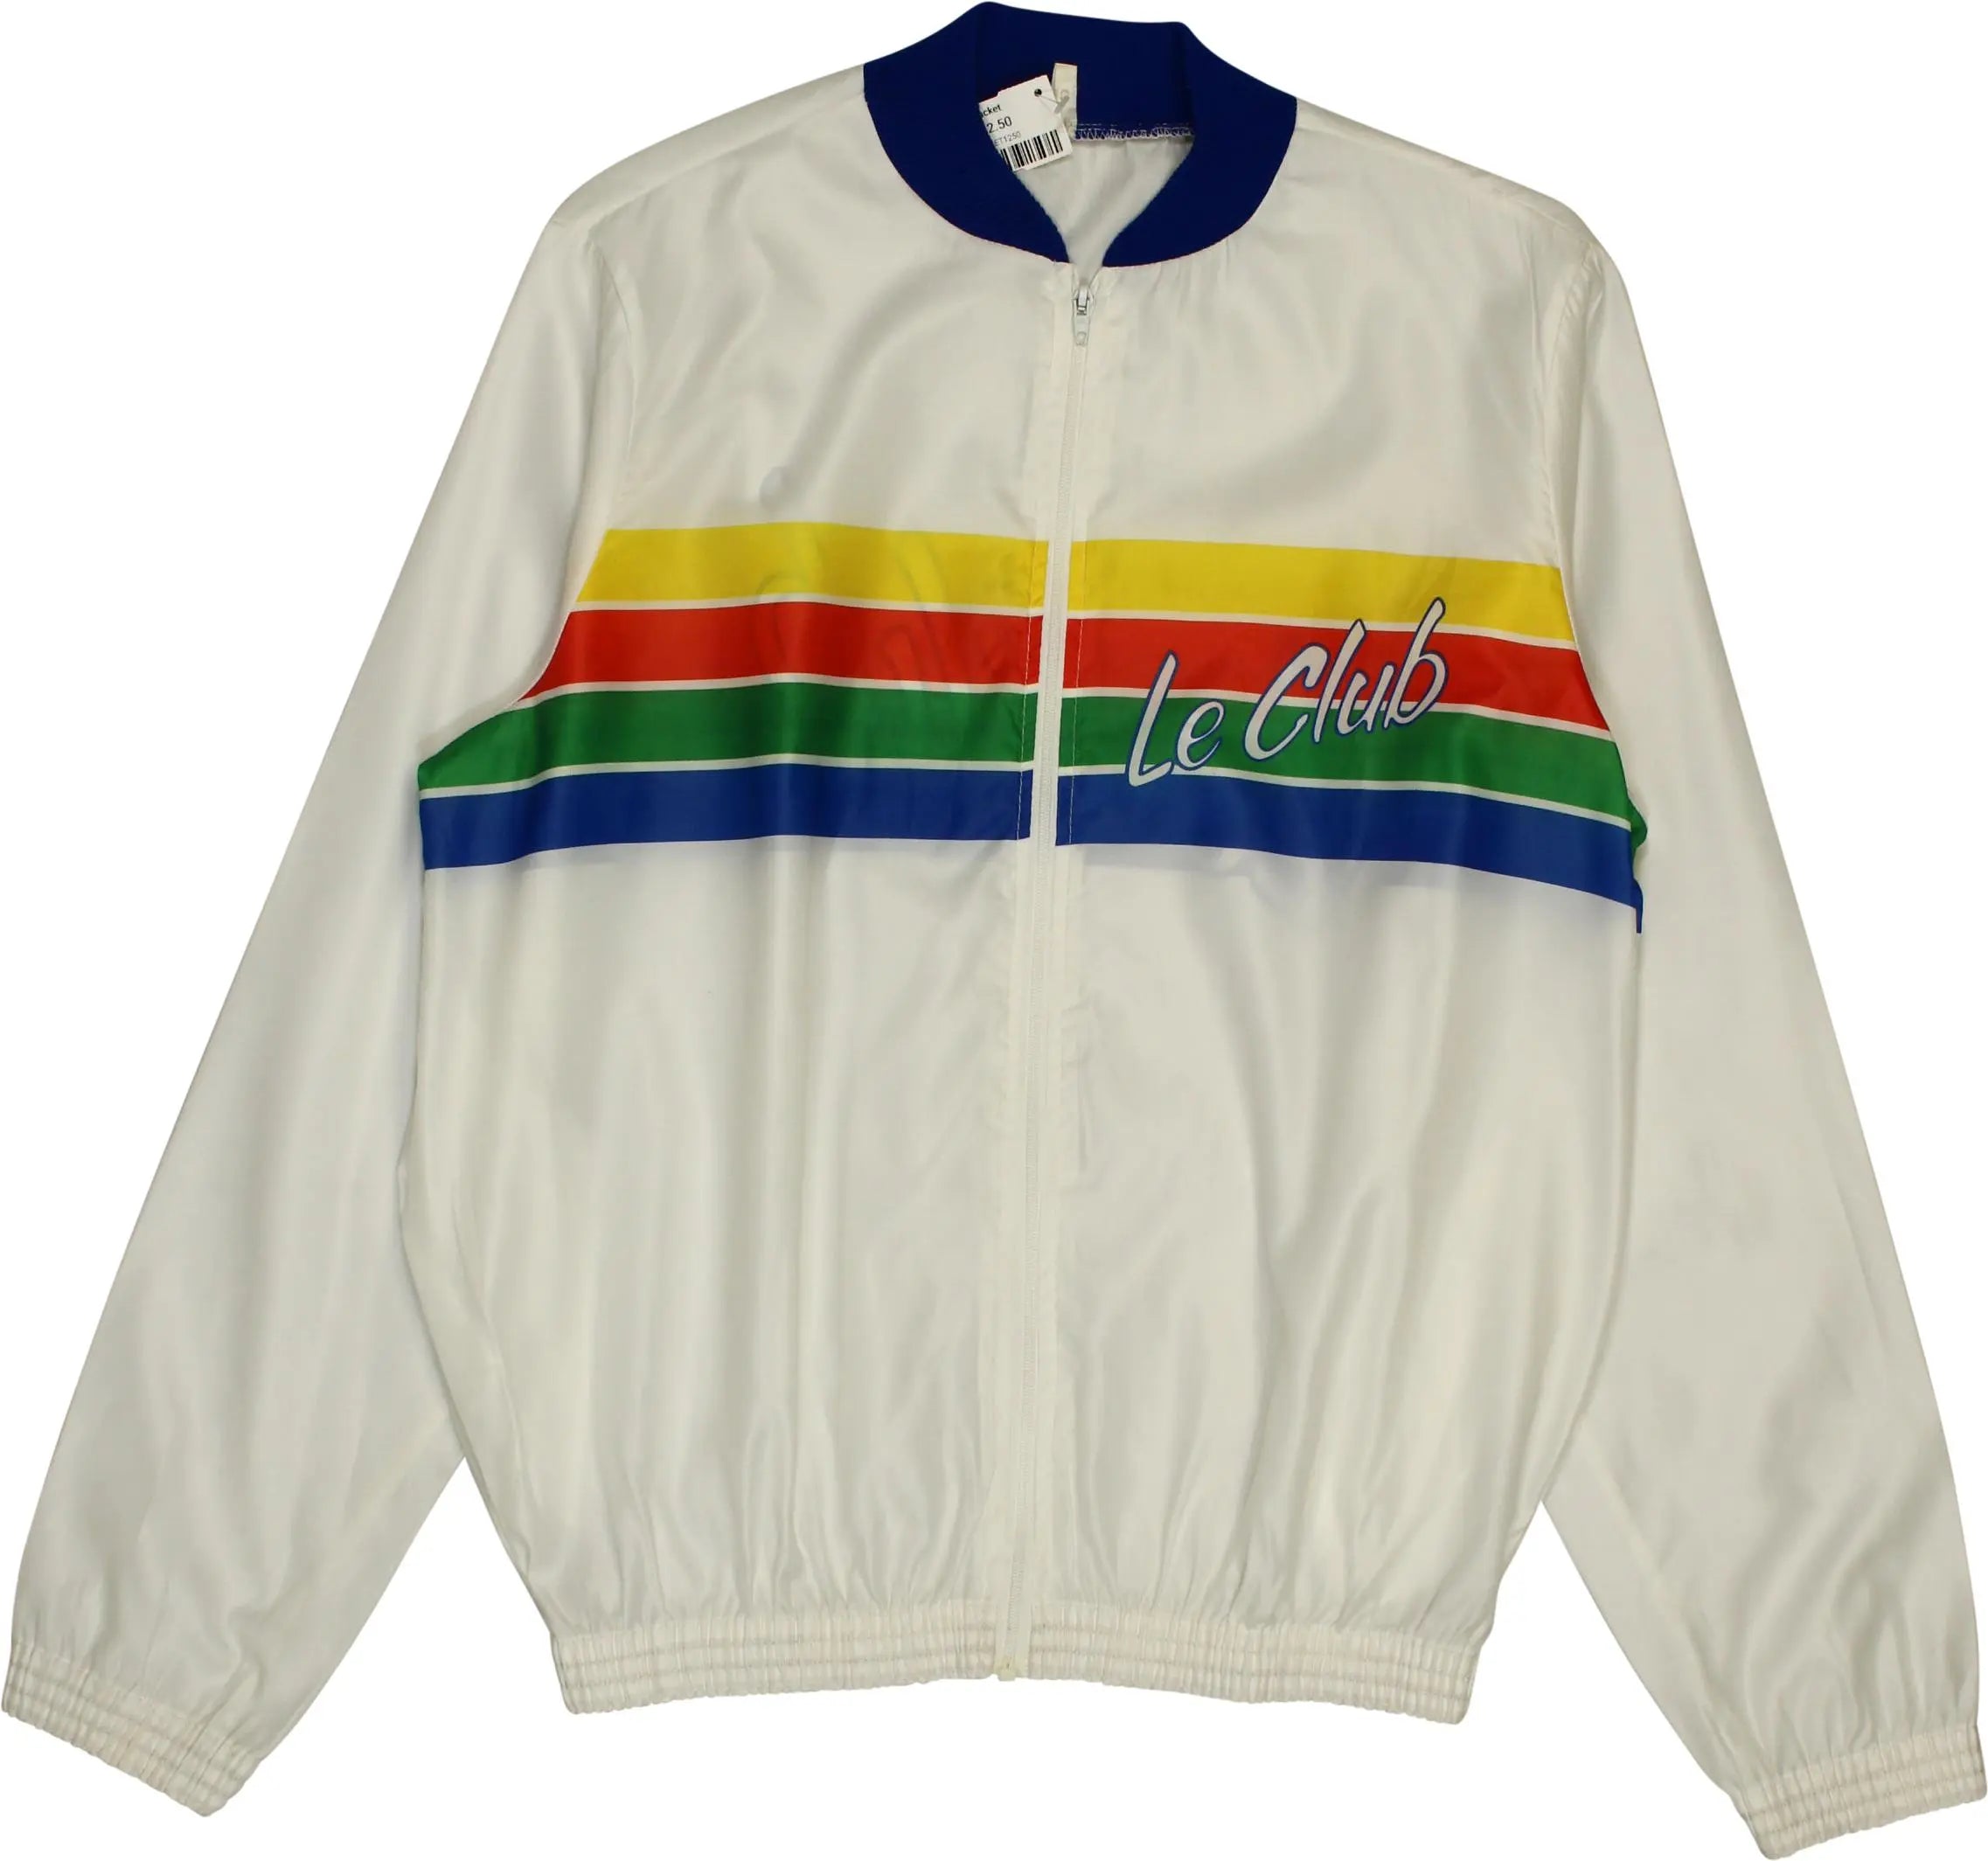 Unknown - White track jacket- ThriftTale.com - Vintage and second handclothing